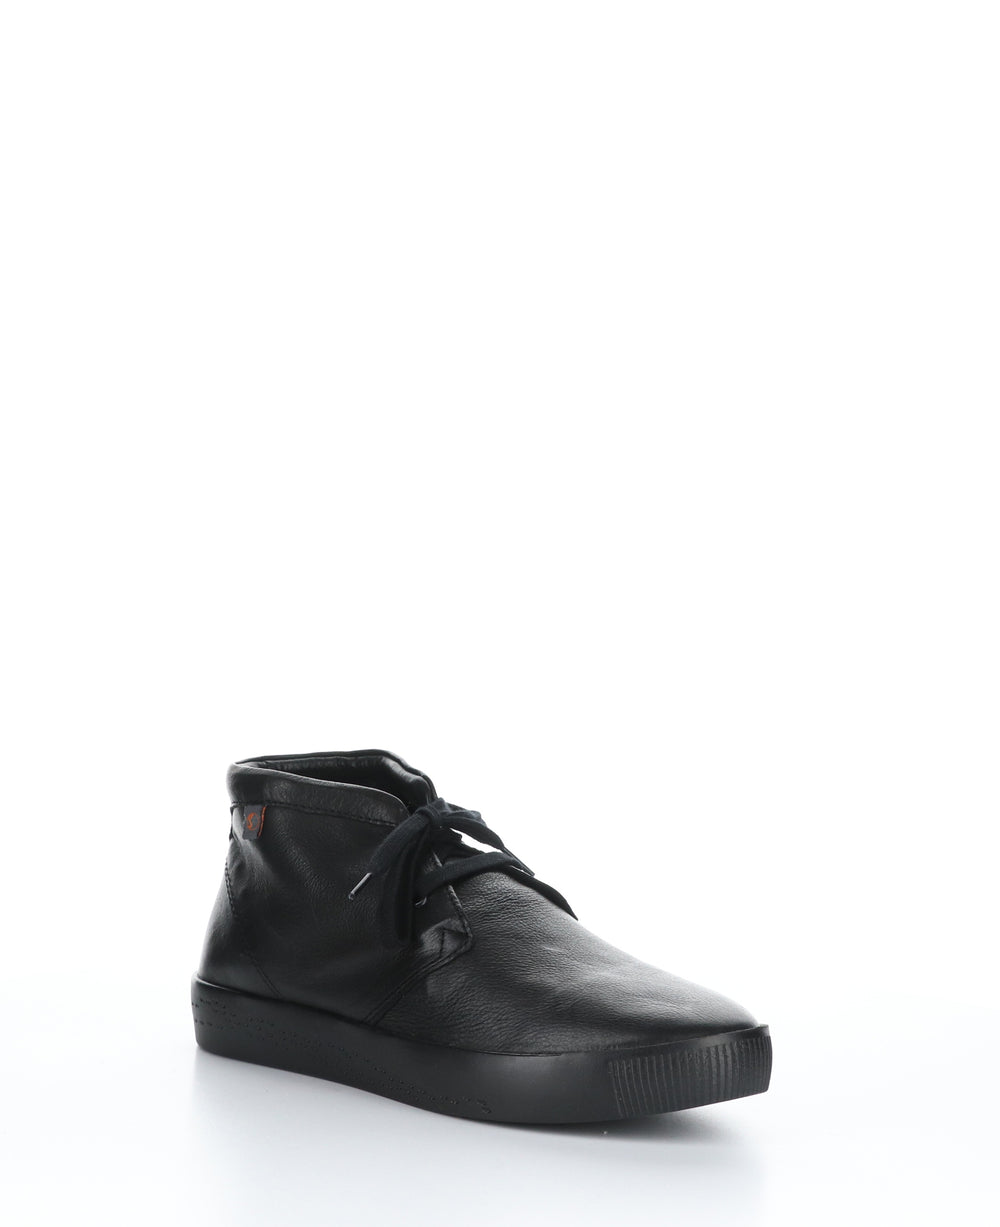 SIAL607SOF BLACK LEATHER Lace-up Ankle Boots|SIAL607SOF Chaussures à Bout Rond in Noir